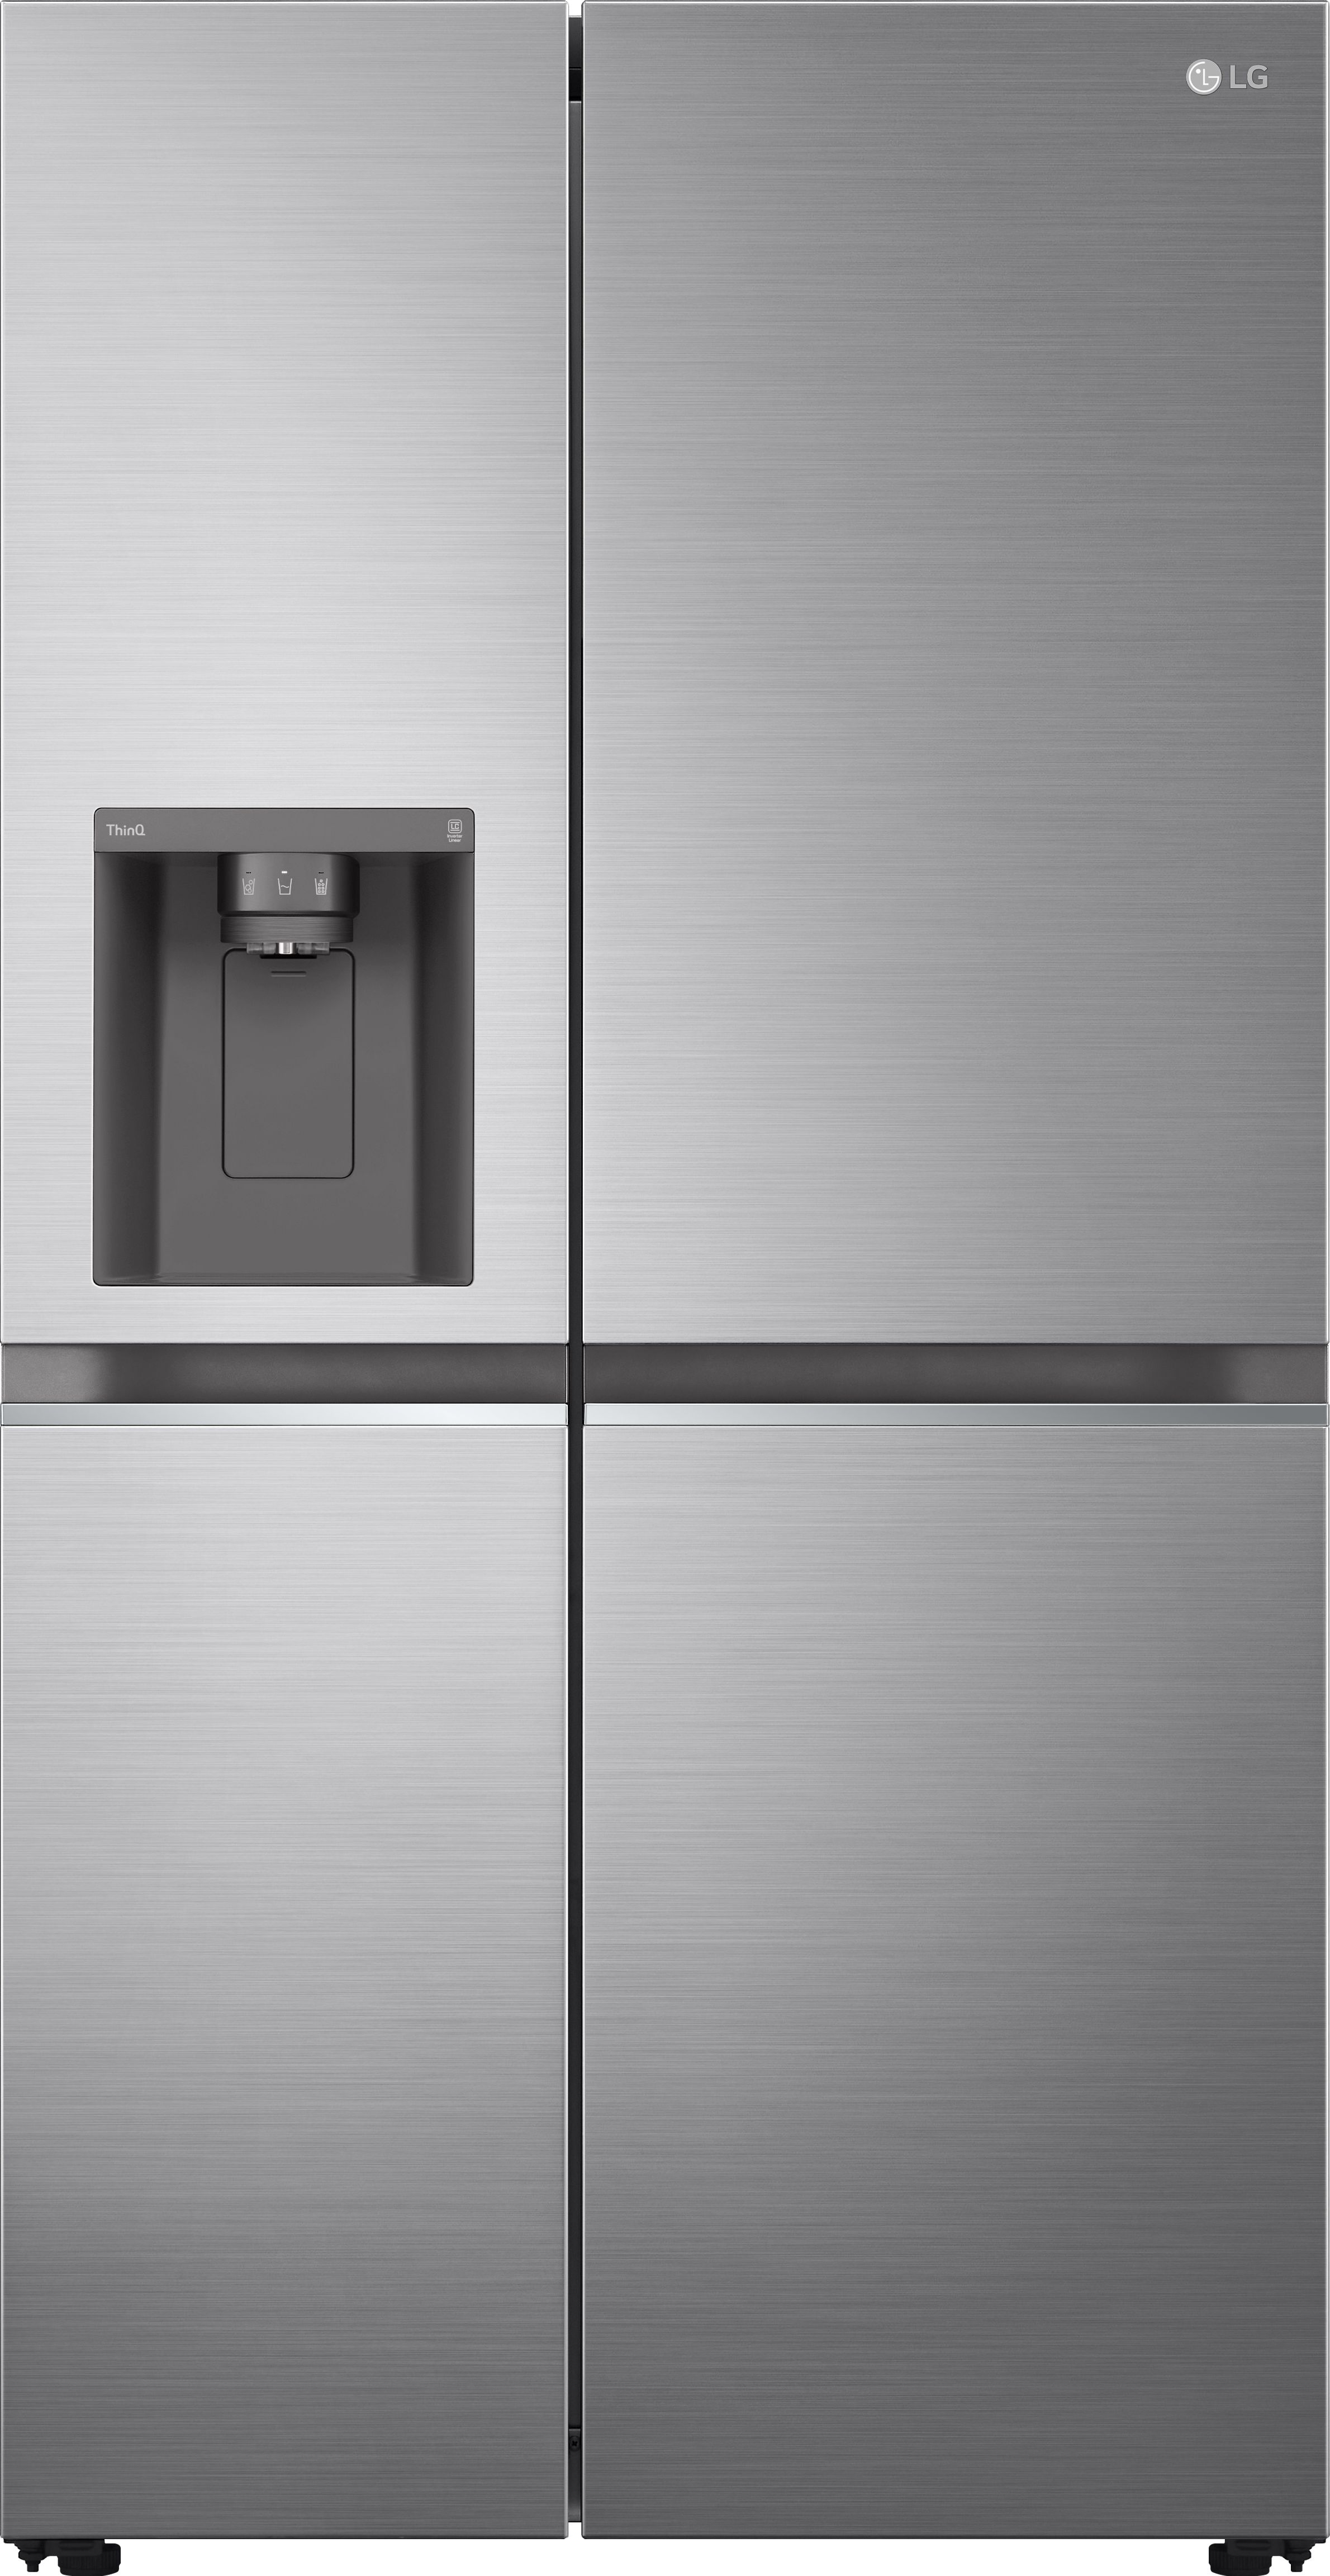 LG NatureFRESH GSLV70PZTD Wifi Connected Plumbed Frost Free American Fridge Freezer - Shiny Steel - D Rated Silver